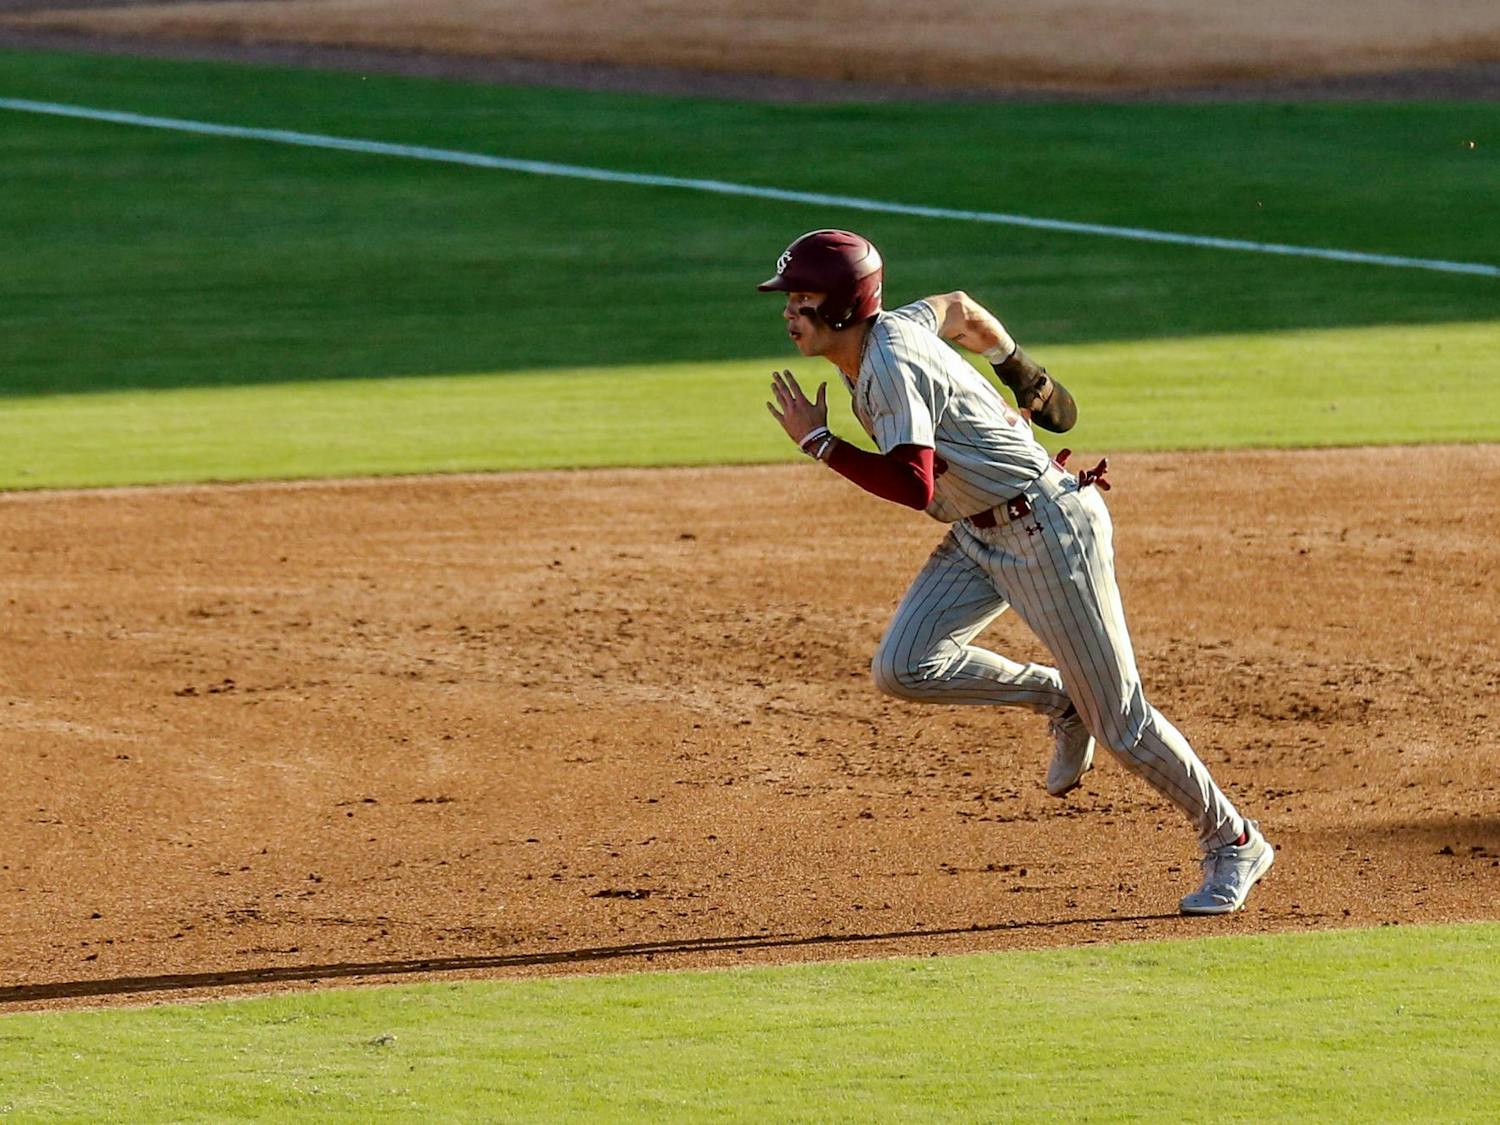 Fifth-year outfielder Dylan Brewer runs up the second baseline during the “Battle at Bull Street” game between South Carolina and Clemson at Segra Park on March 2, 2024. Brewer went 2-4 in at bats for South Carolina.